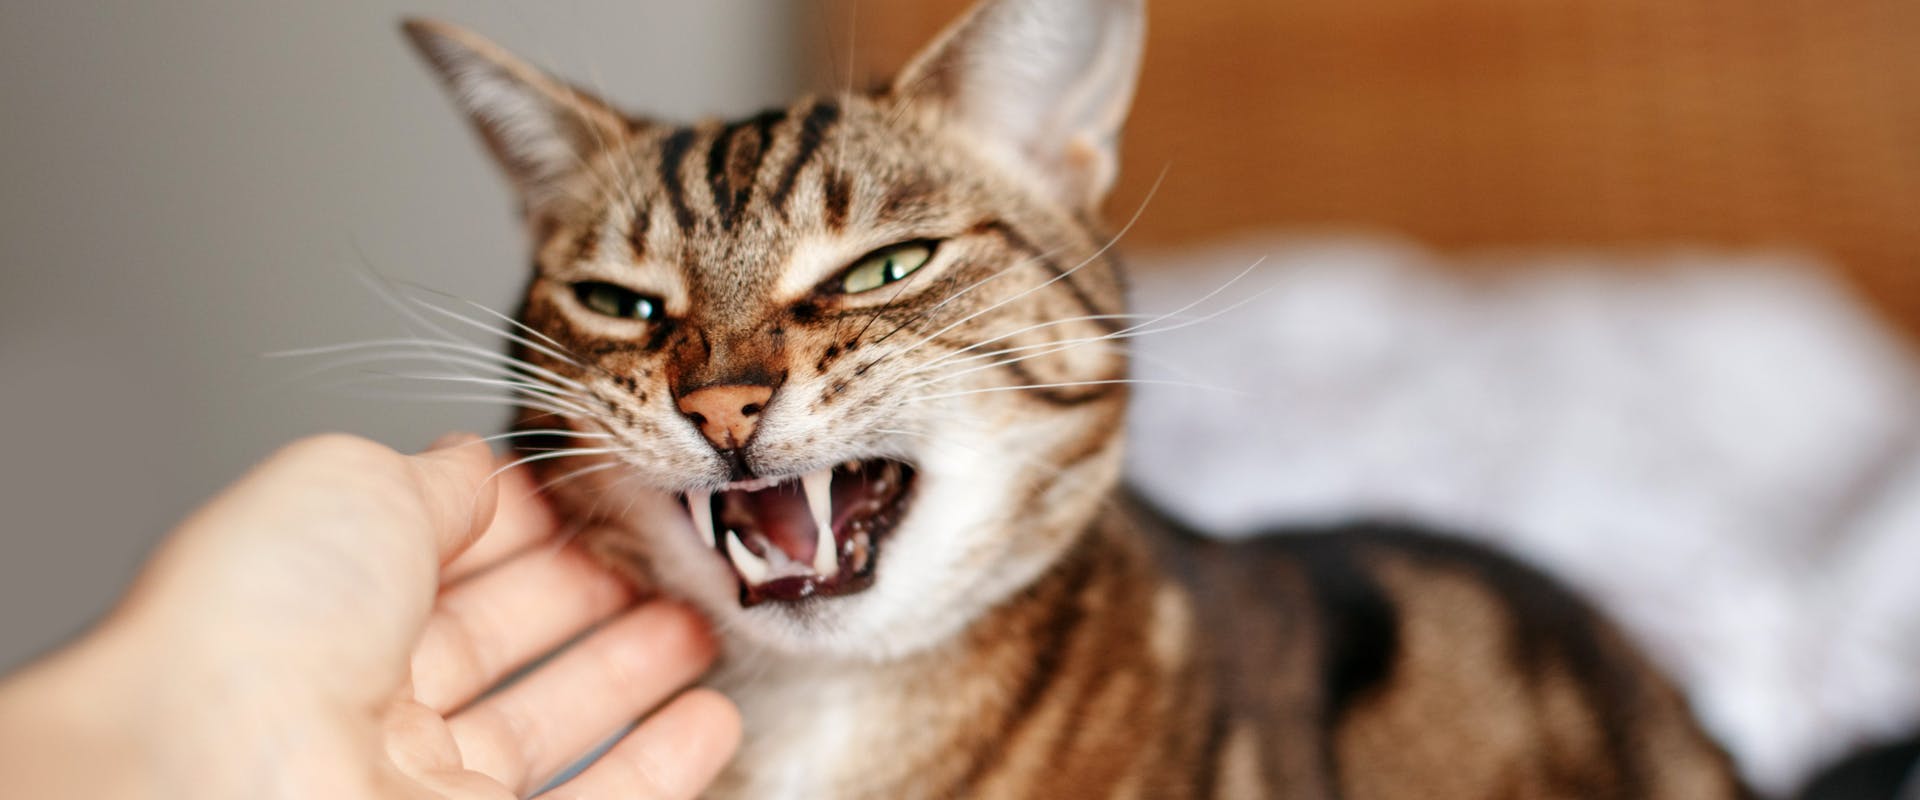 Cat hissing showing teeth while being stroked